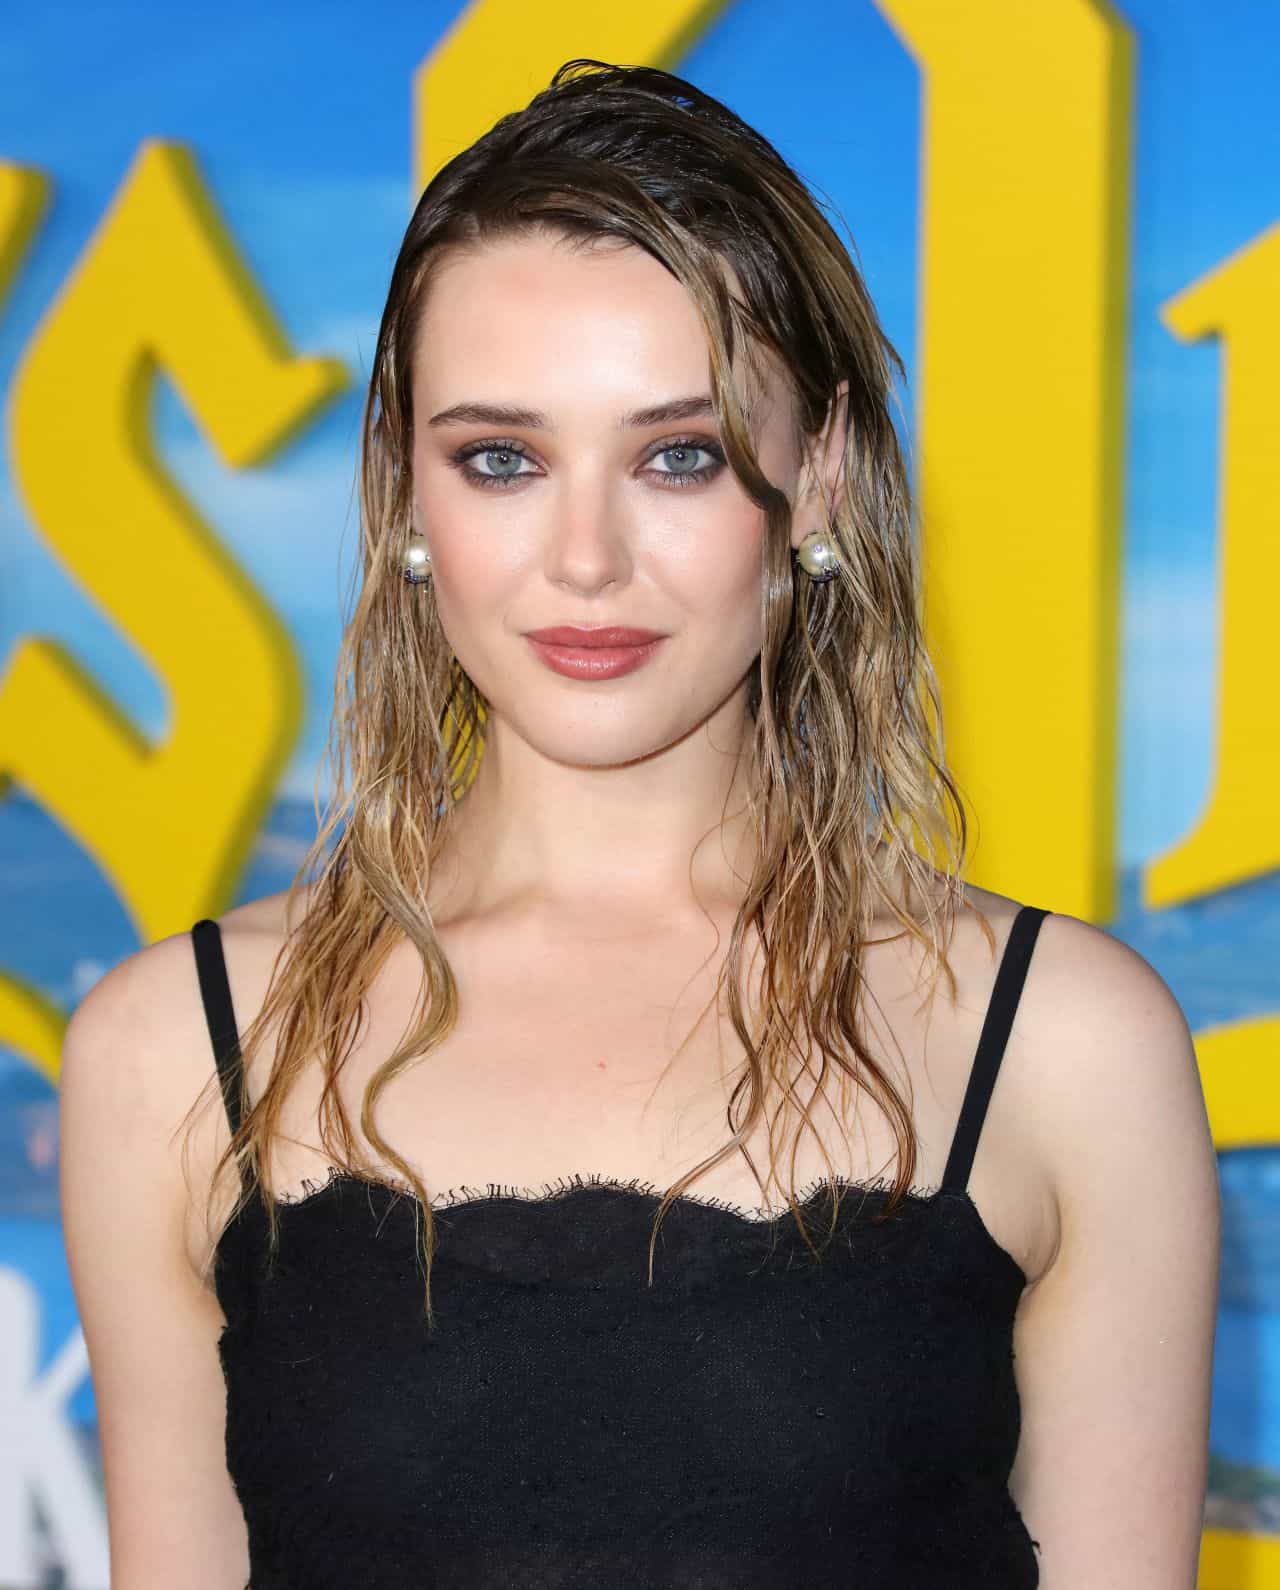 Katherine Langford in an Elegant Lace Dress at the "Glass Onion" Premiere